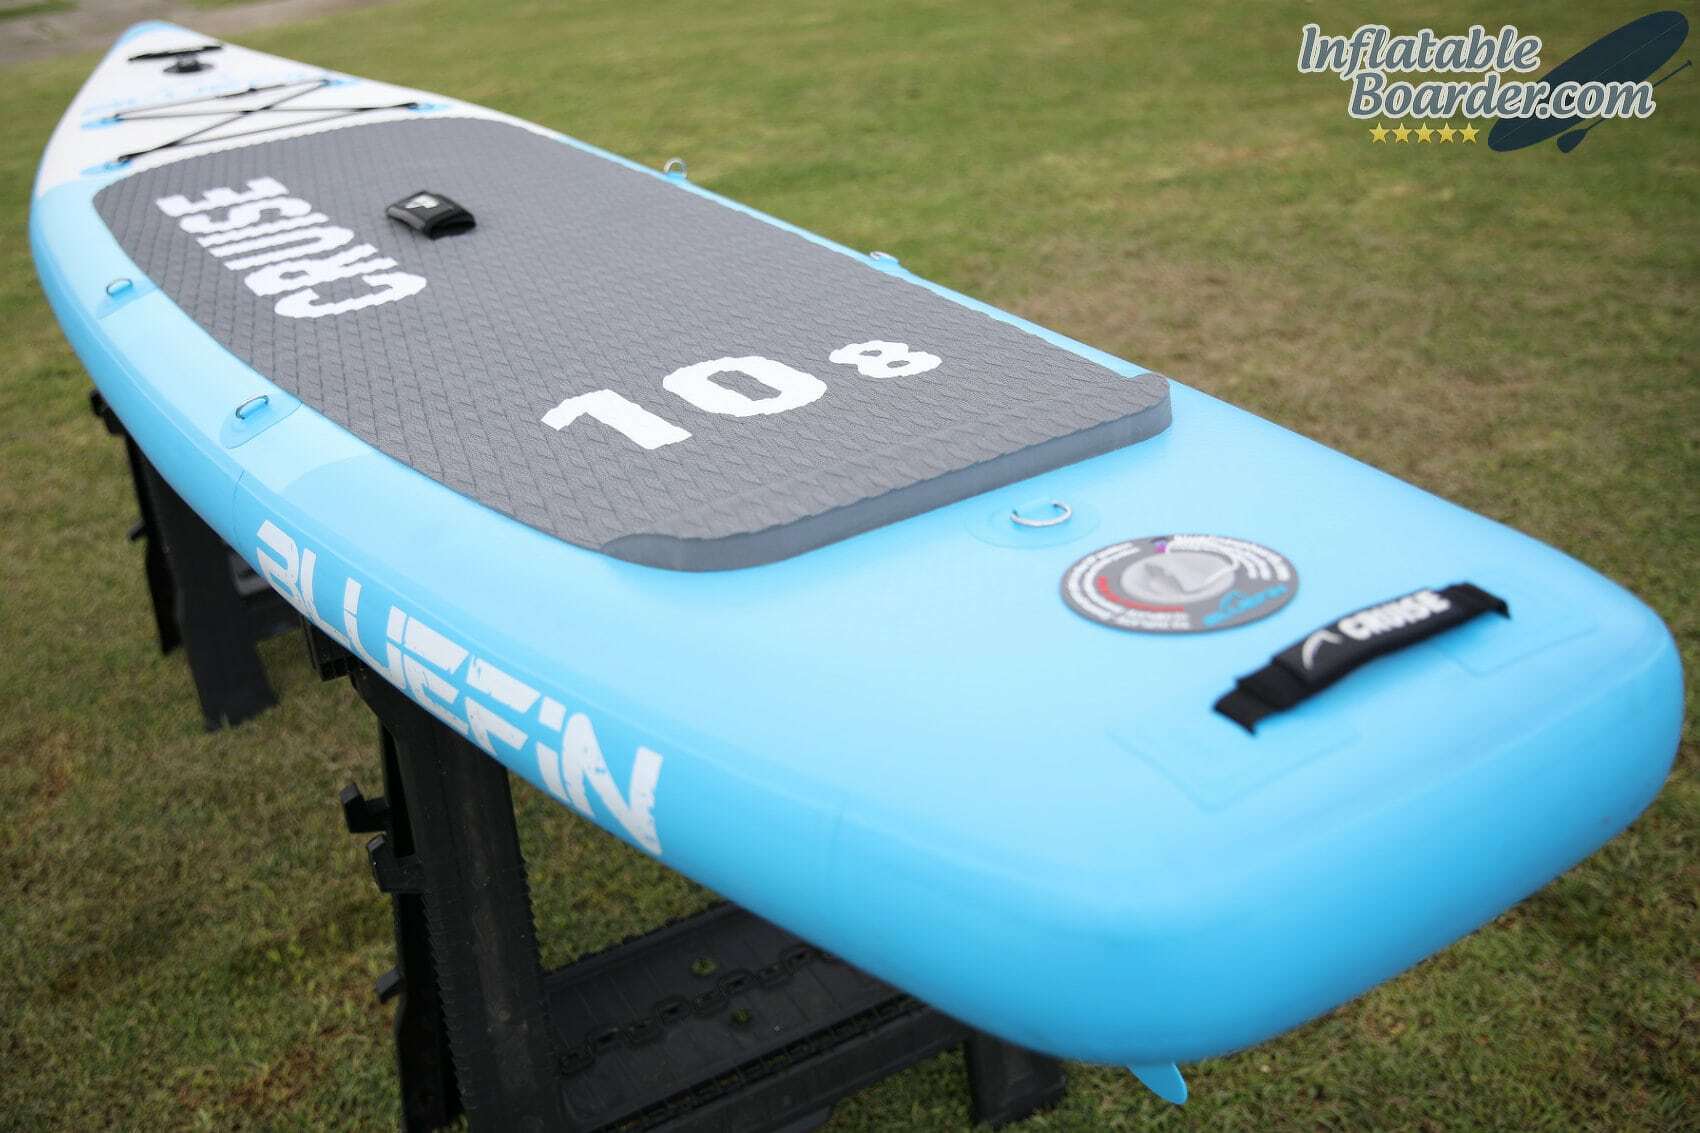 Bluefin SUP Inflatable Paddle Board